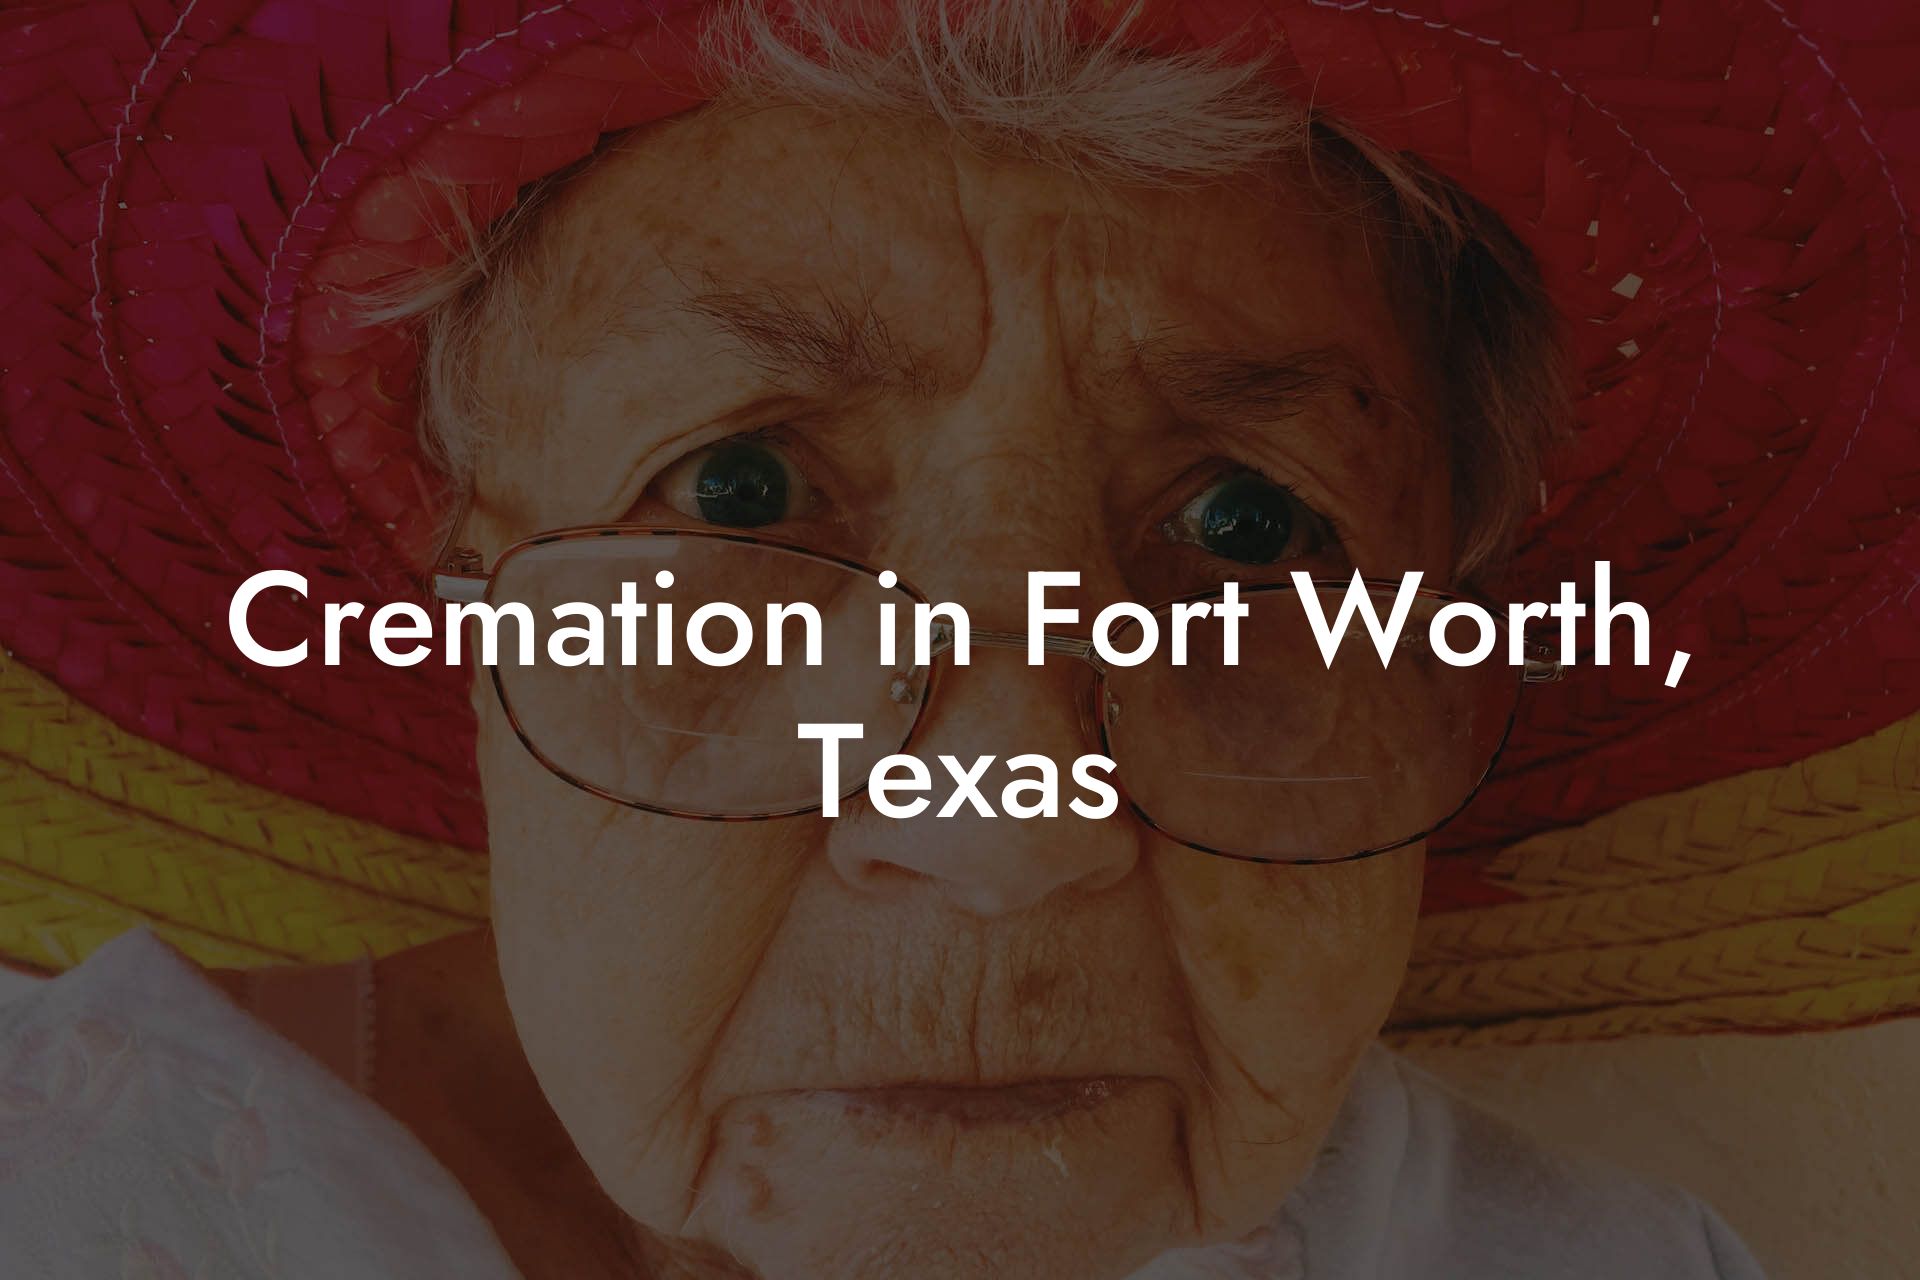 Cremation in Fort Worth, Texas